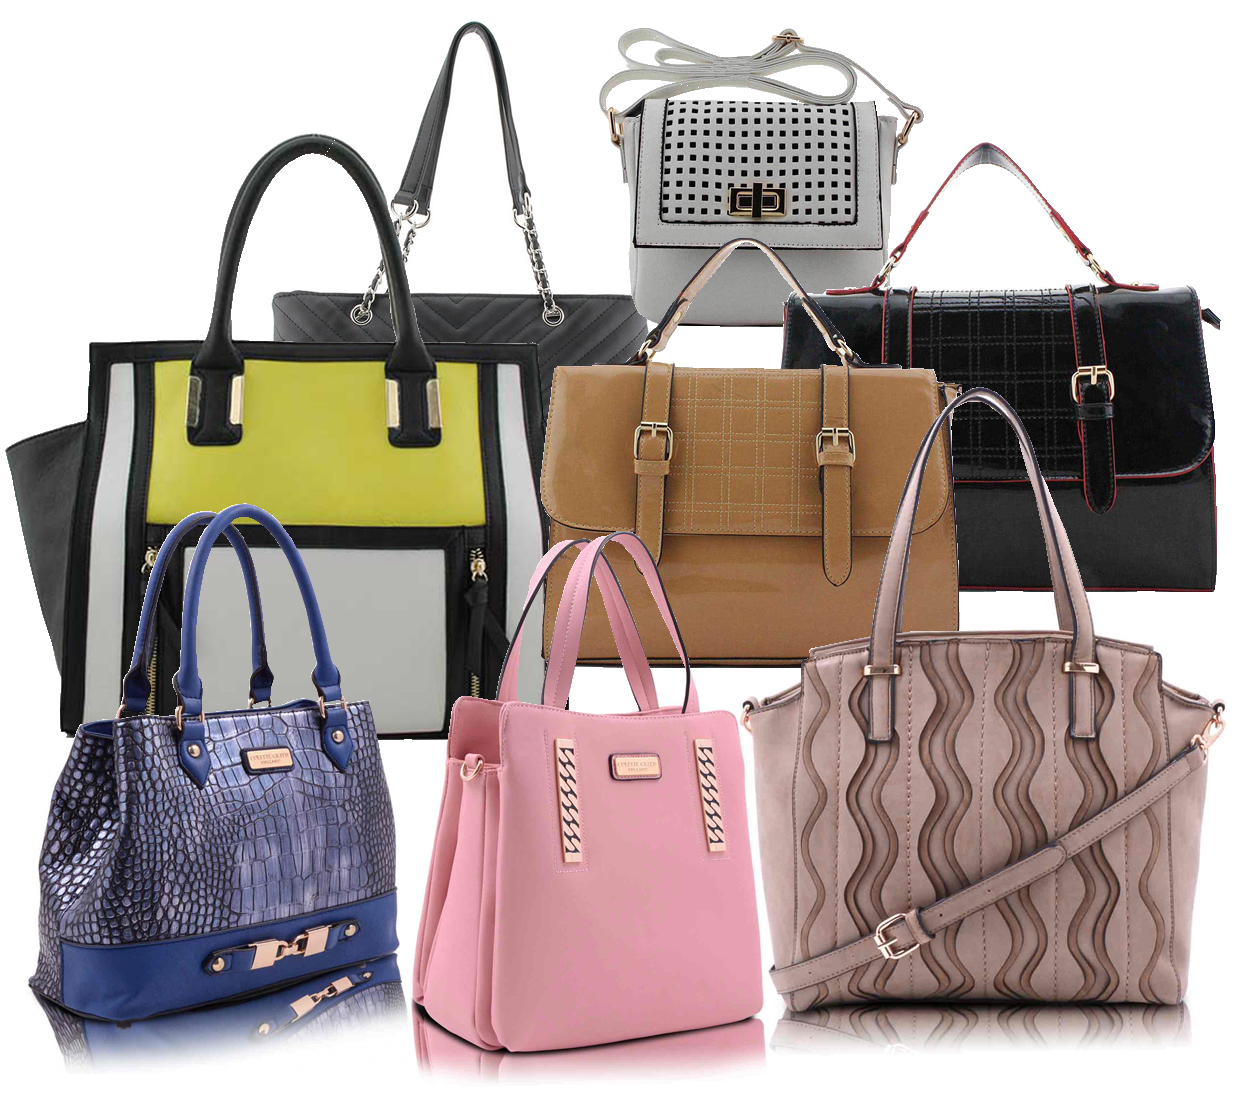 The Handbag Collection - Find Deals in Cardiff - Cardiff Deal Locators ...